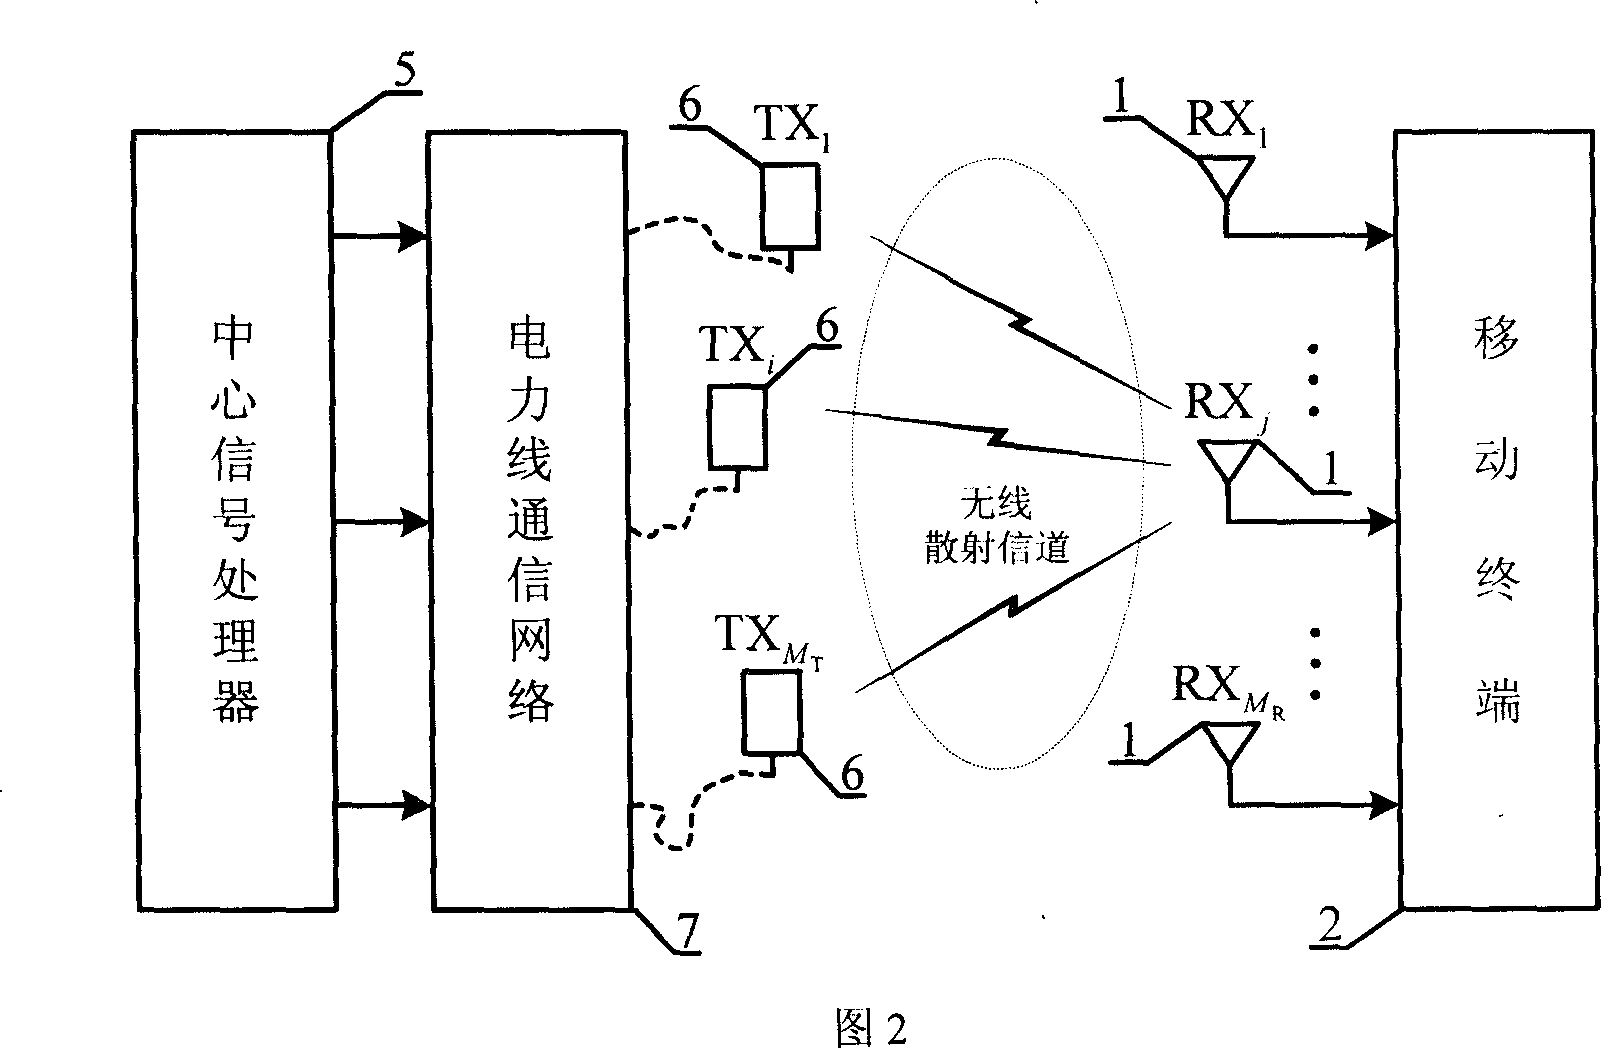 Distributed multi-input multi-output public mobile communication system based on electric line